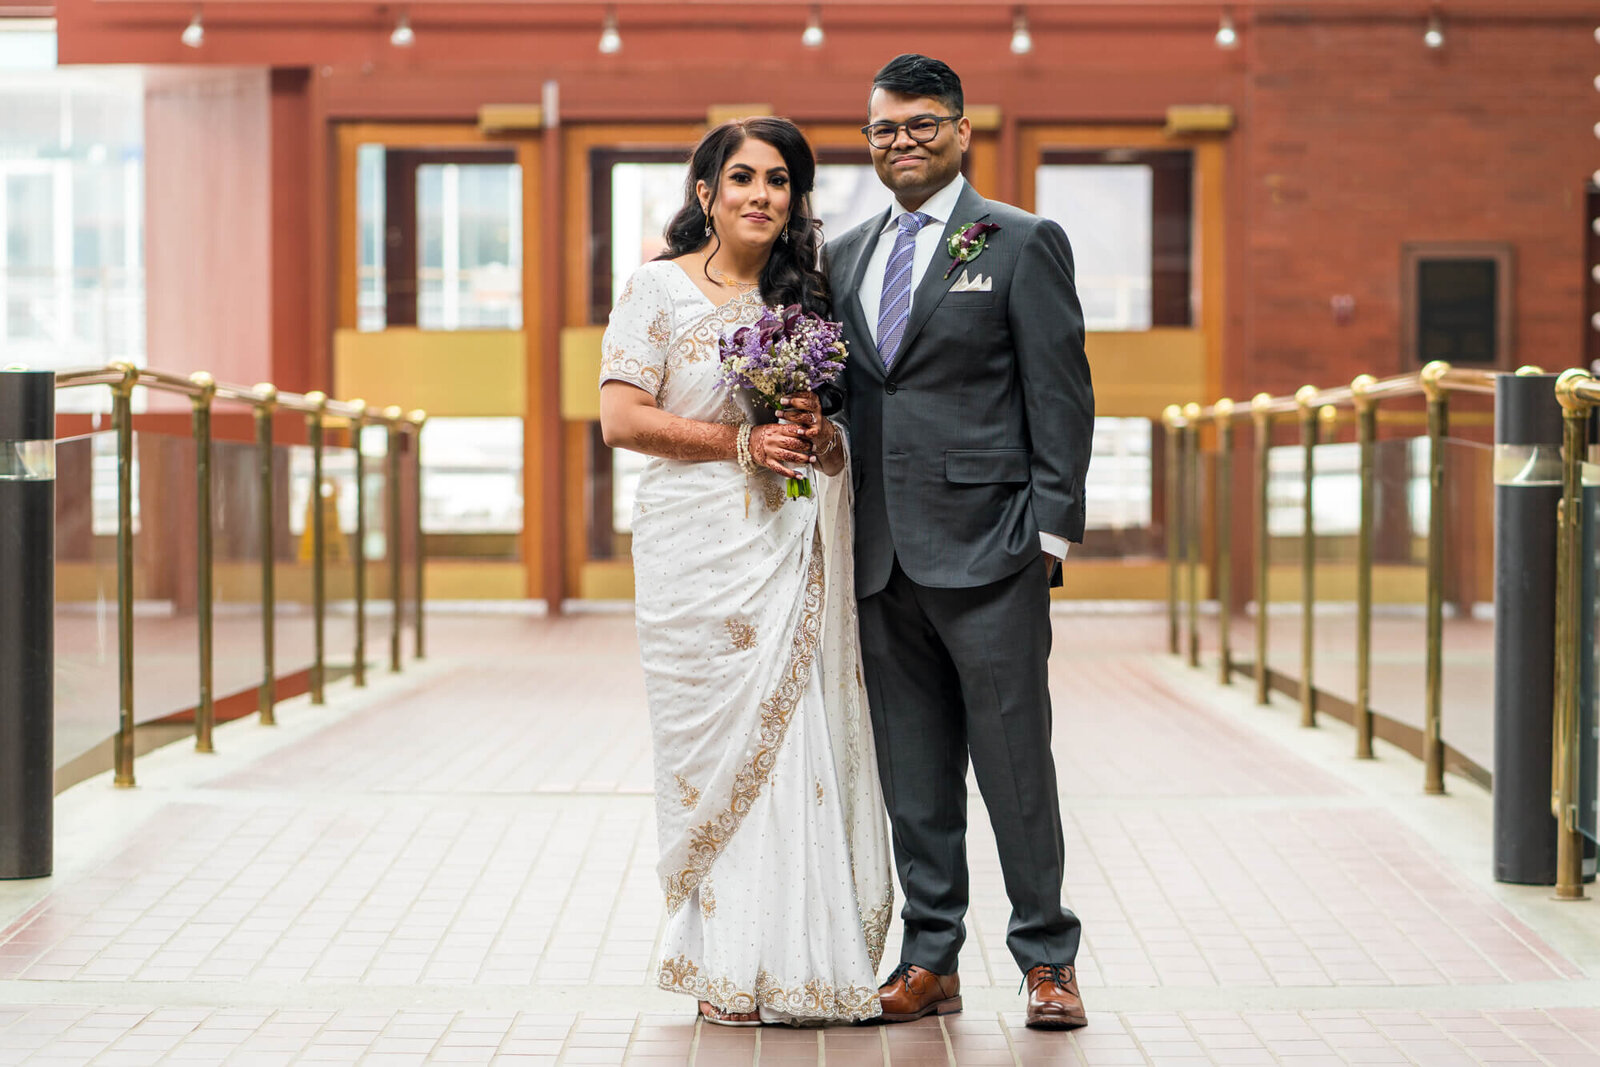 East Indian Bride and Groom - Citadel Theater